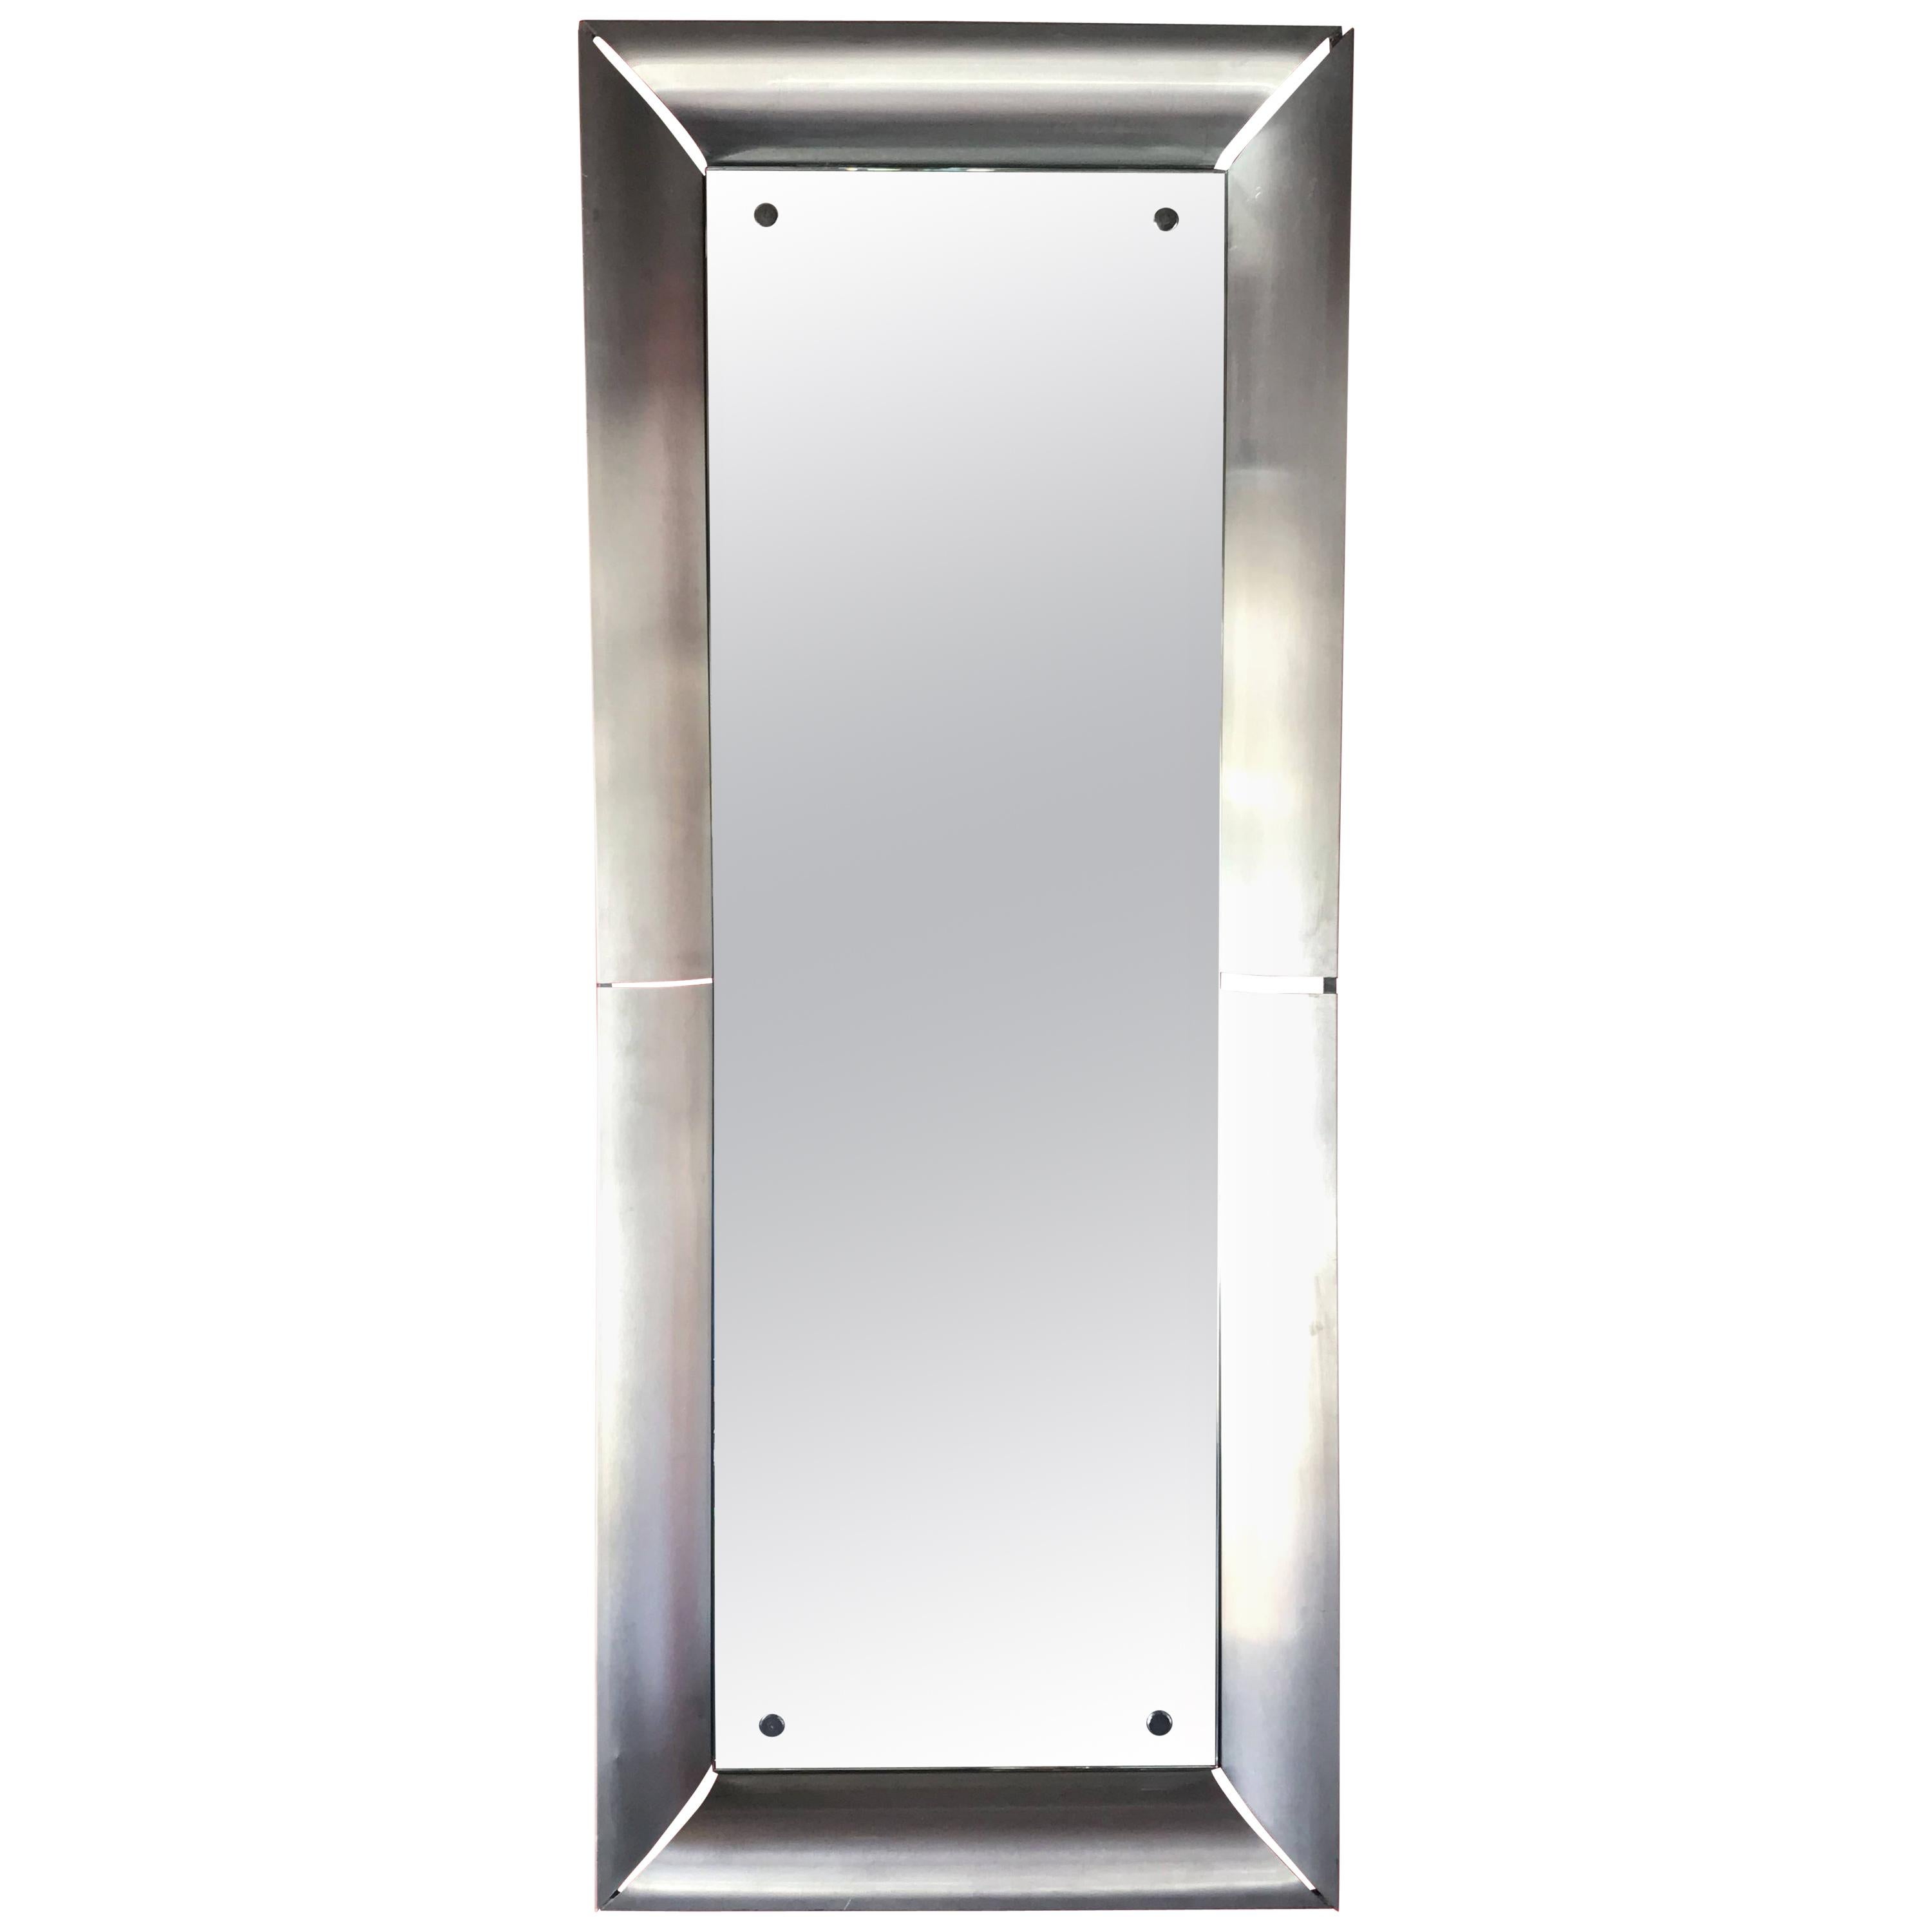 Two Rectangular Mirrors FINAL CLEARANCE SALE